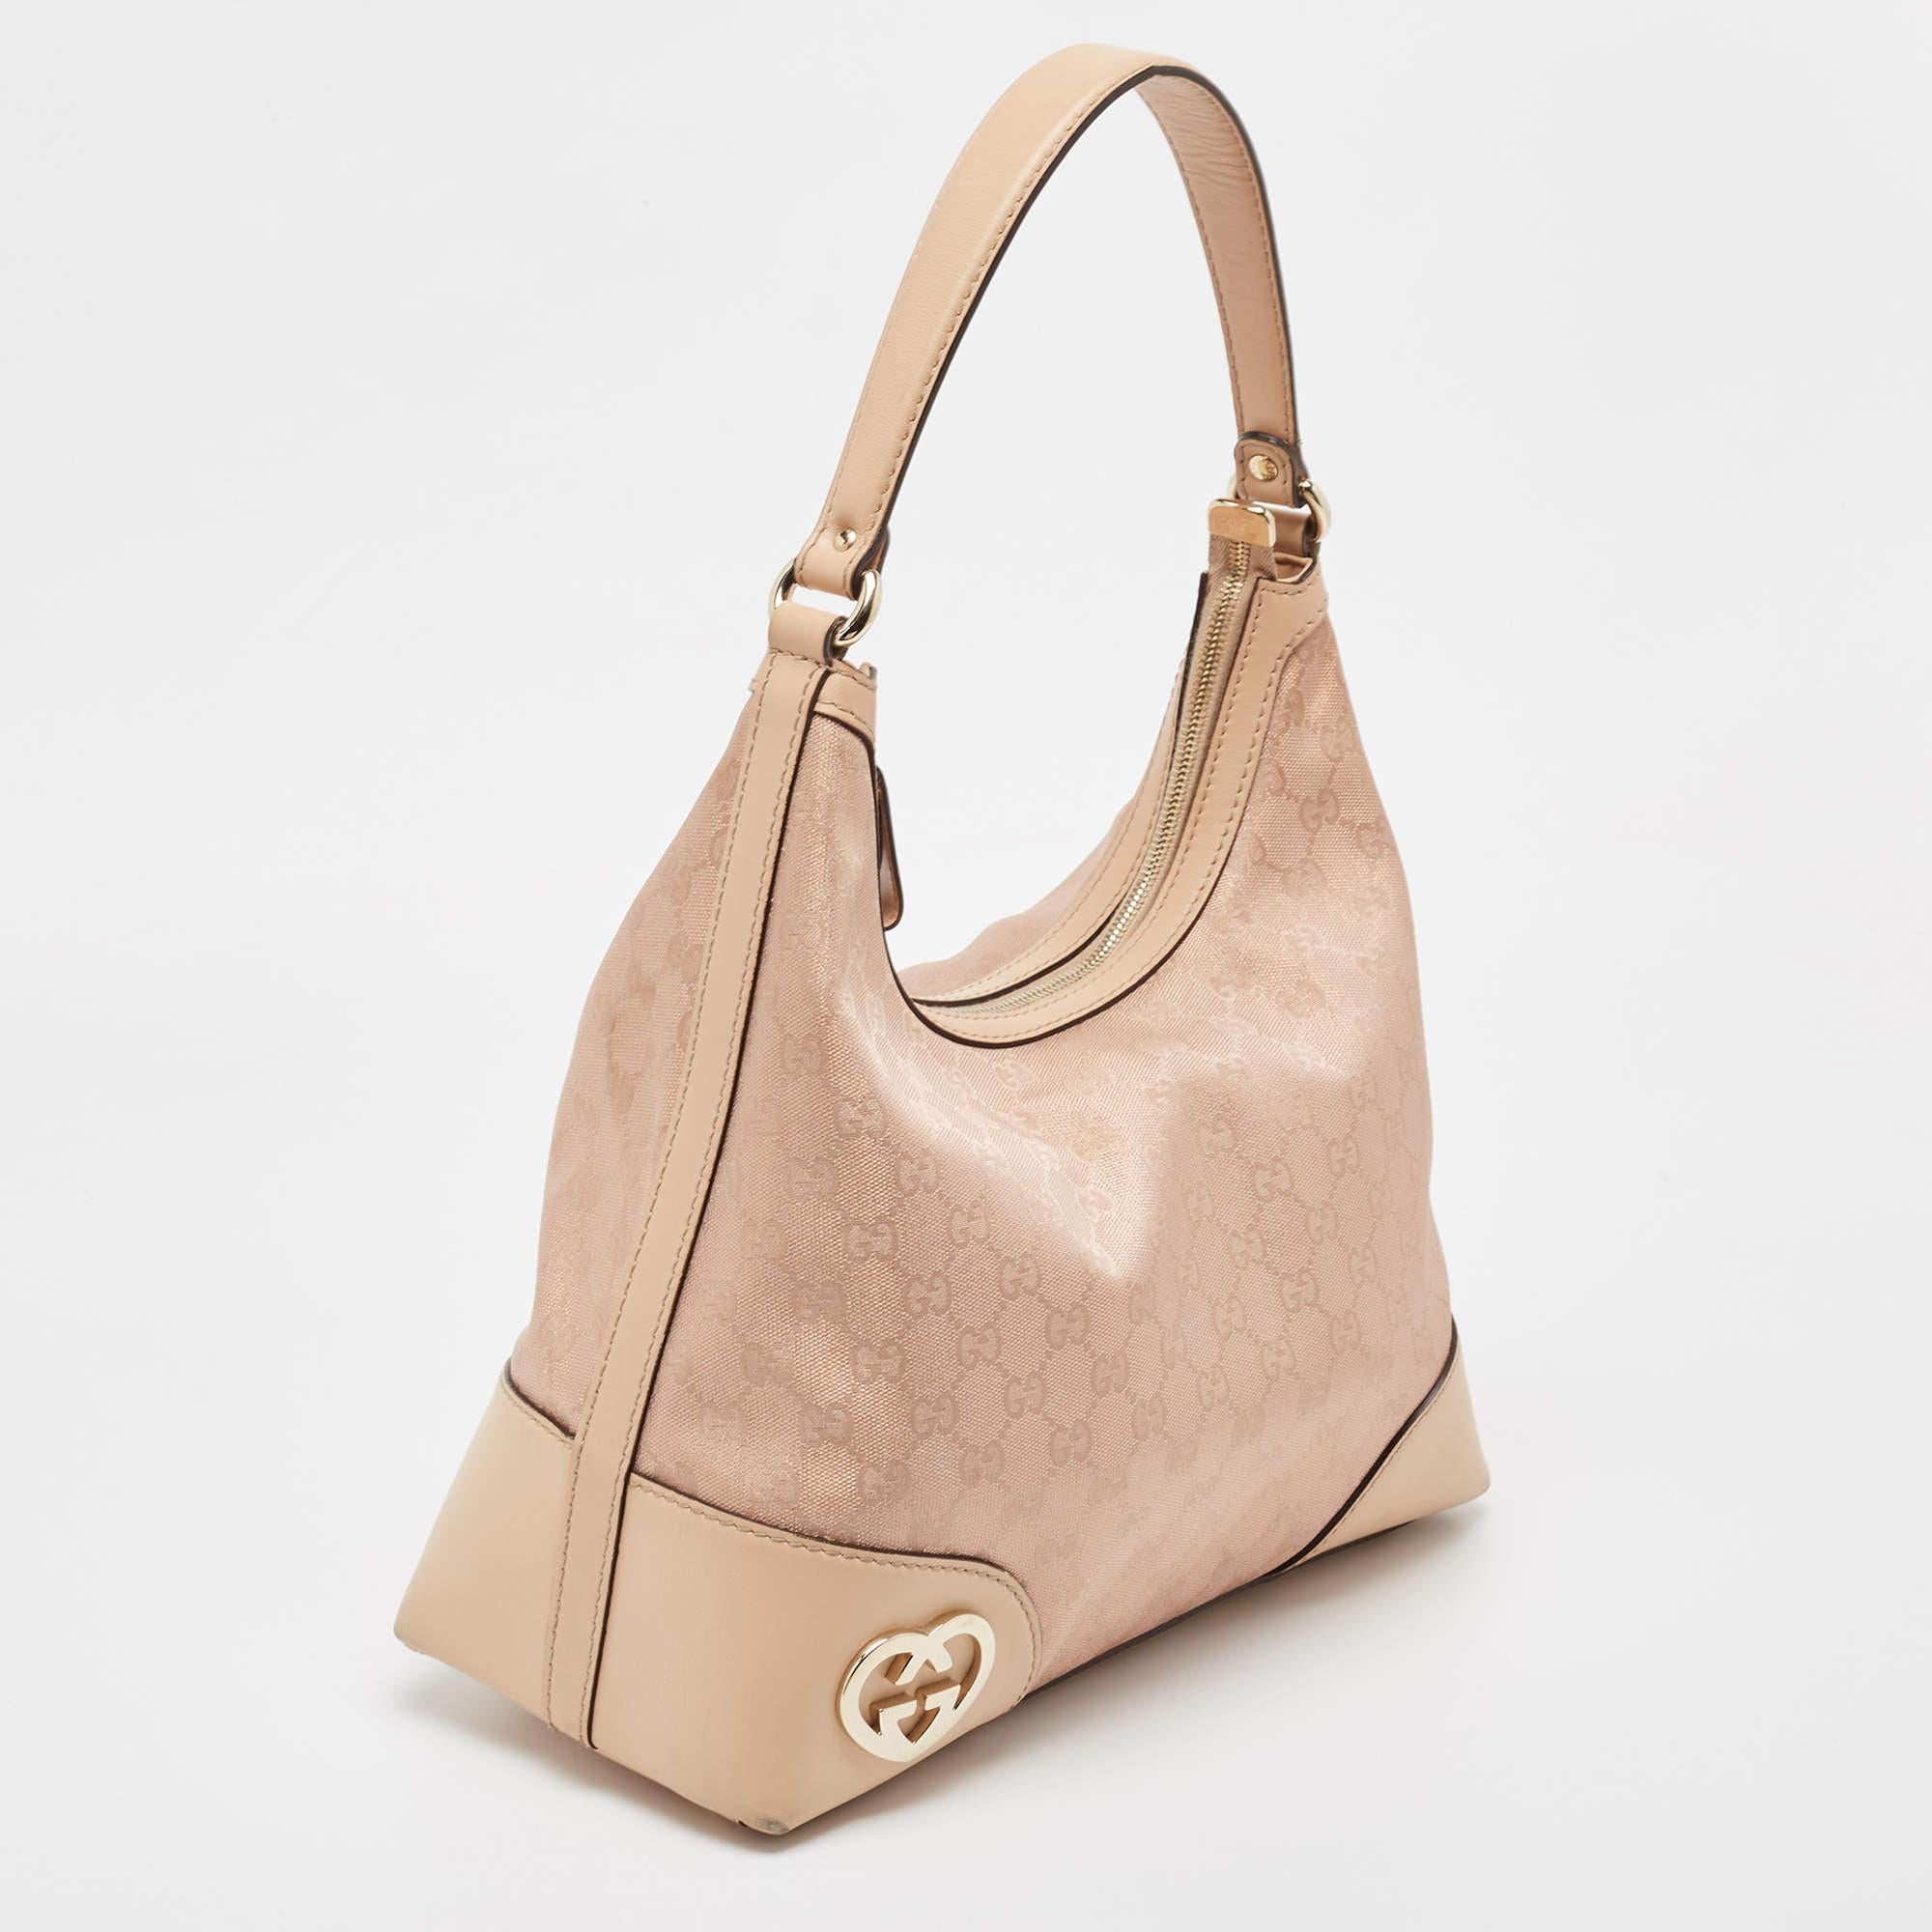 Gucci Beige/Metallic Pink GG Canvas and Leather Medium Lovely Hobo In Good Condition For Sale In Dubai, Al Qouz 2